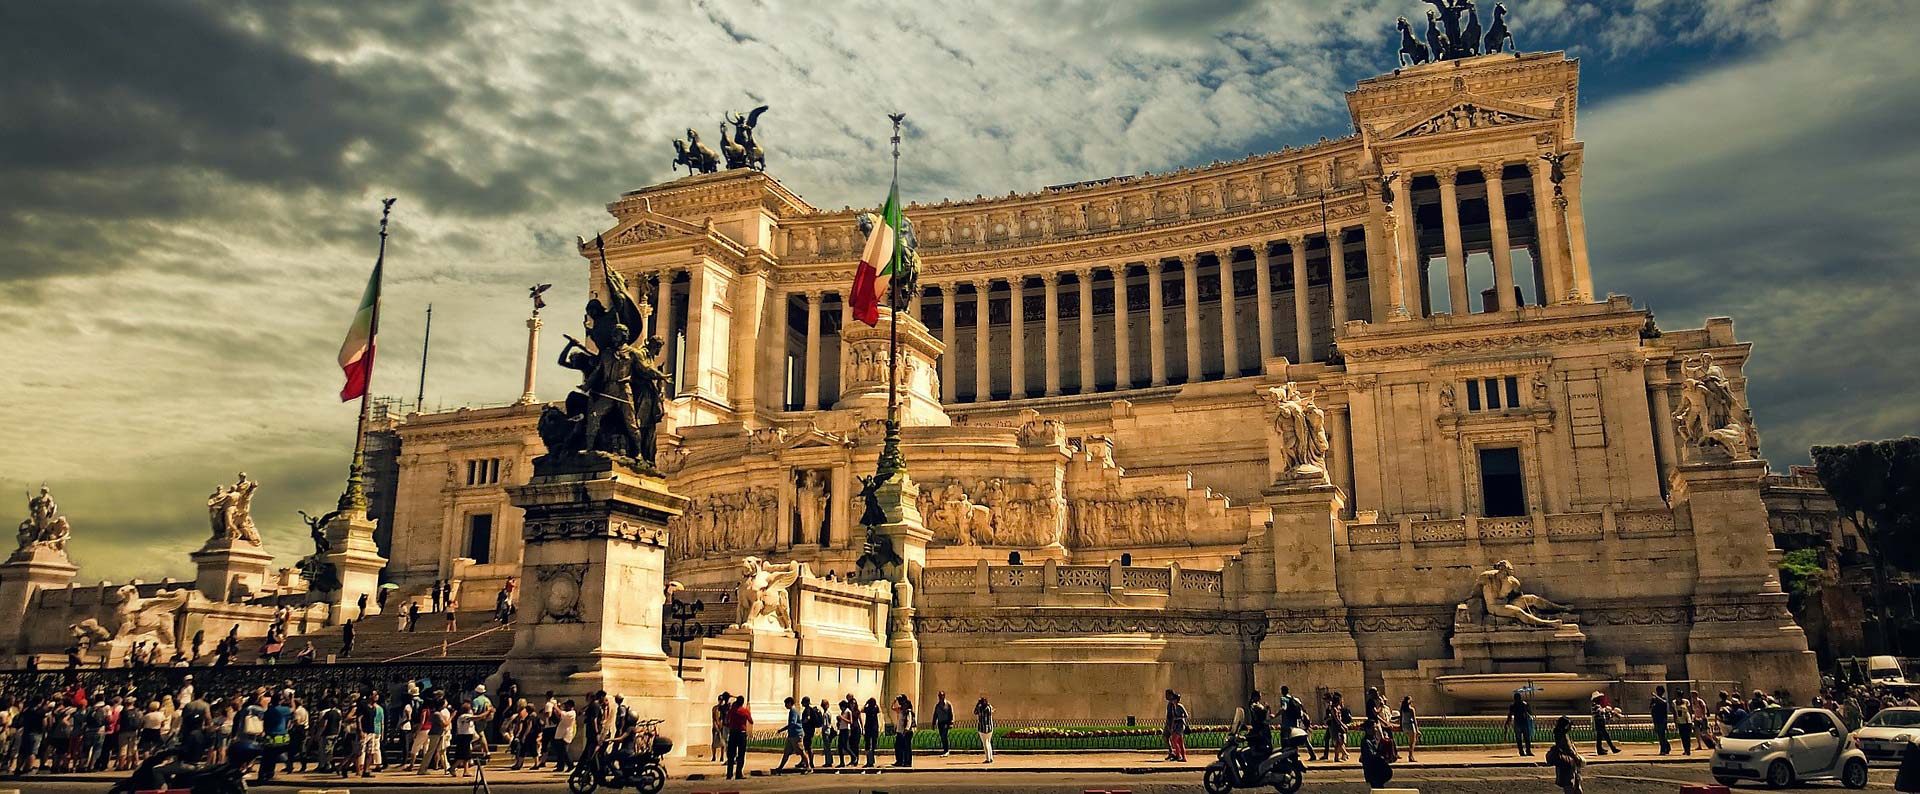 Discounted flight tickets from Los Angeles to Rome - IFlyFirstClass